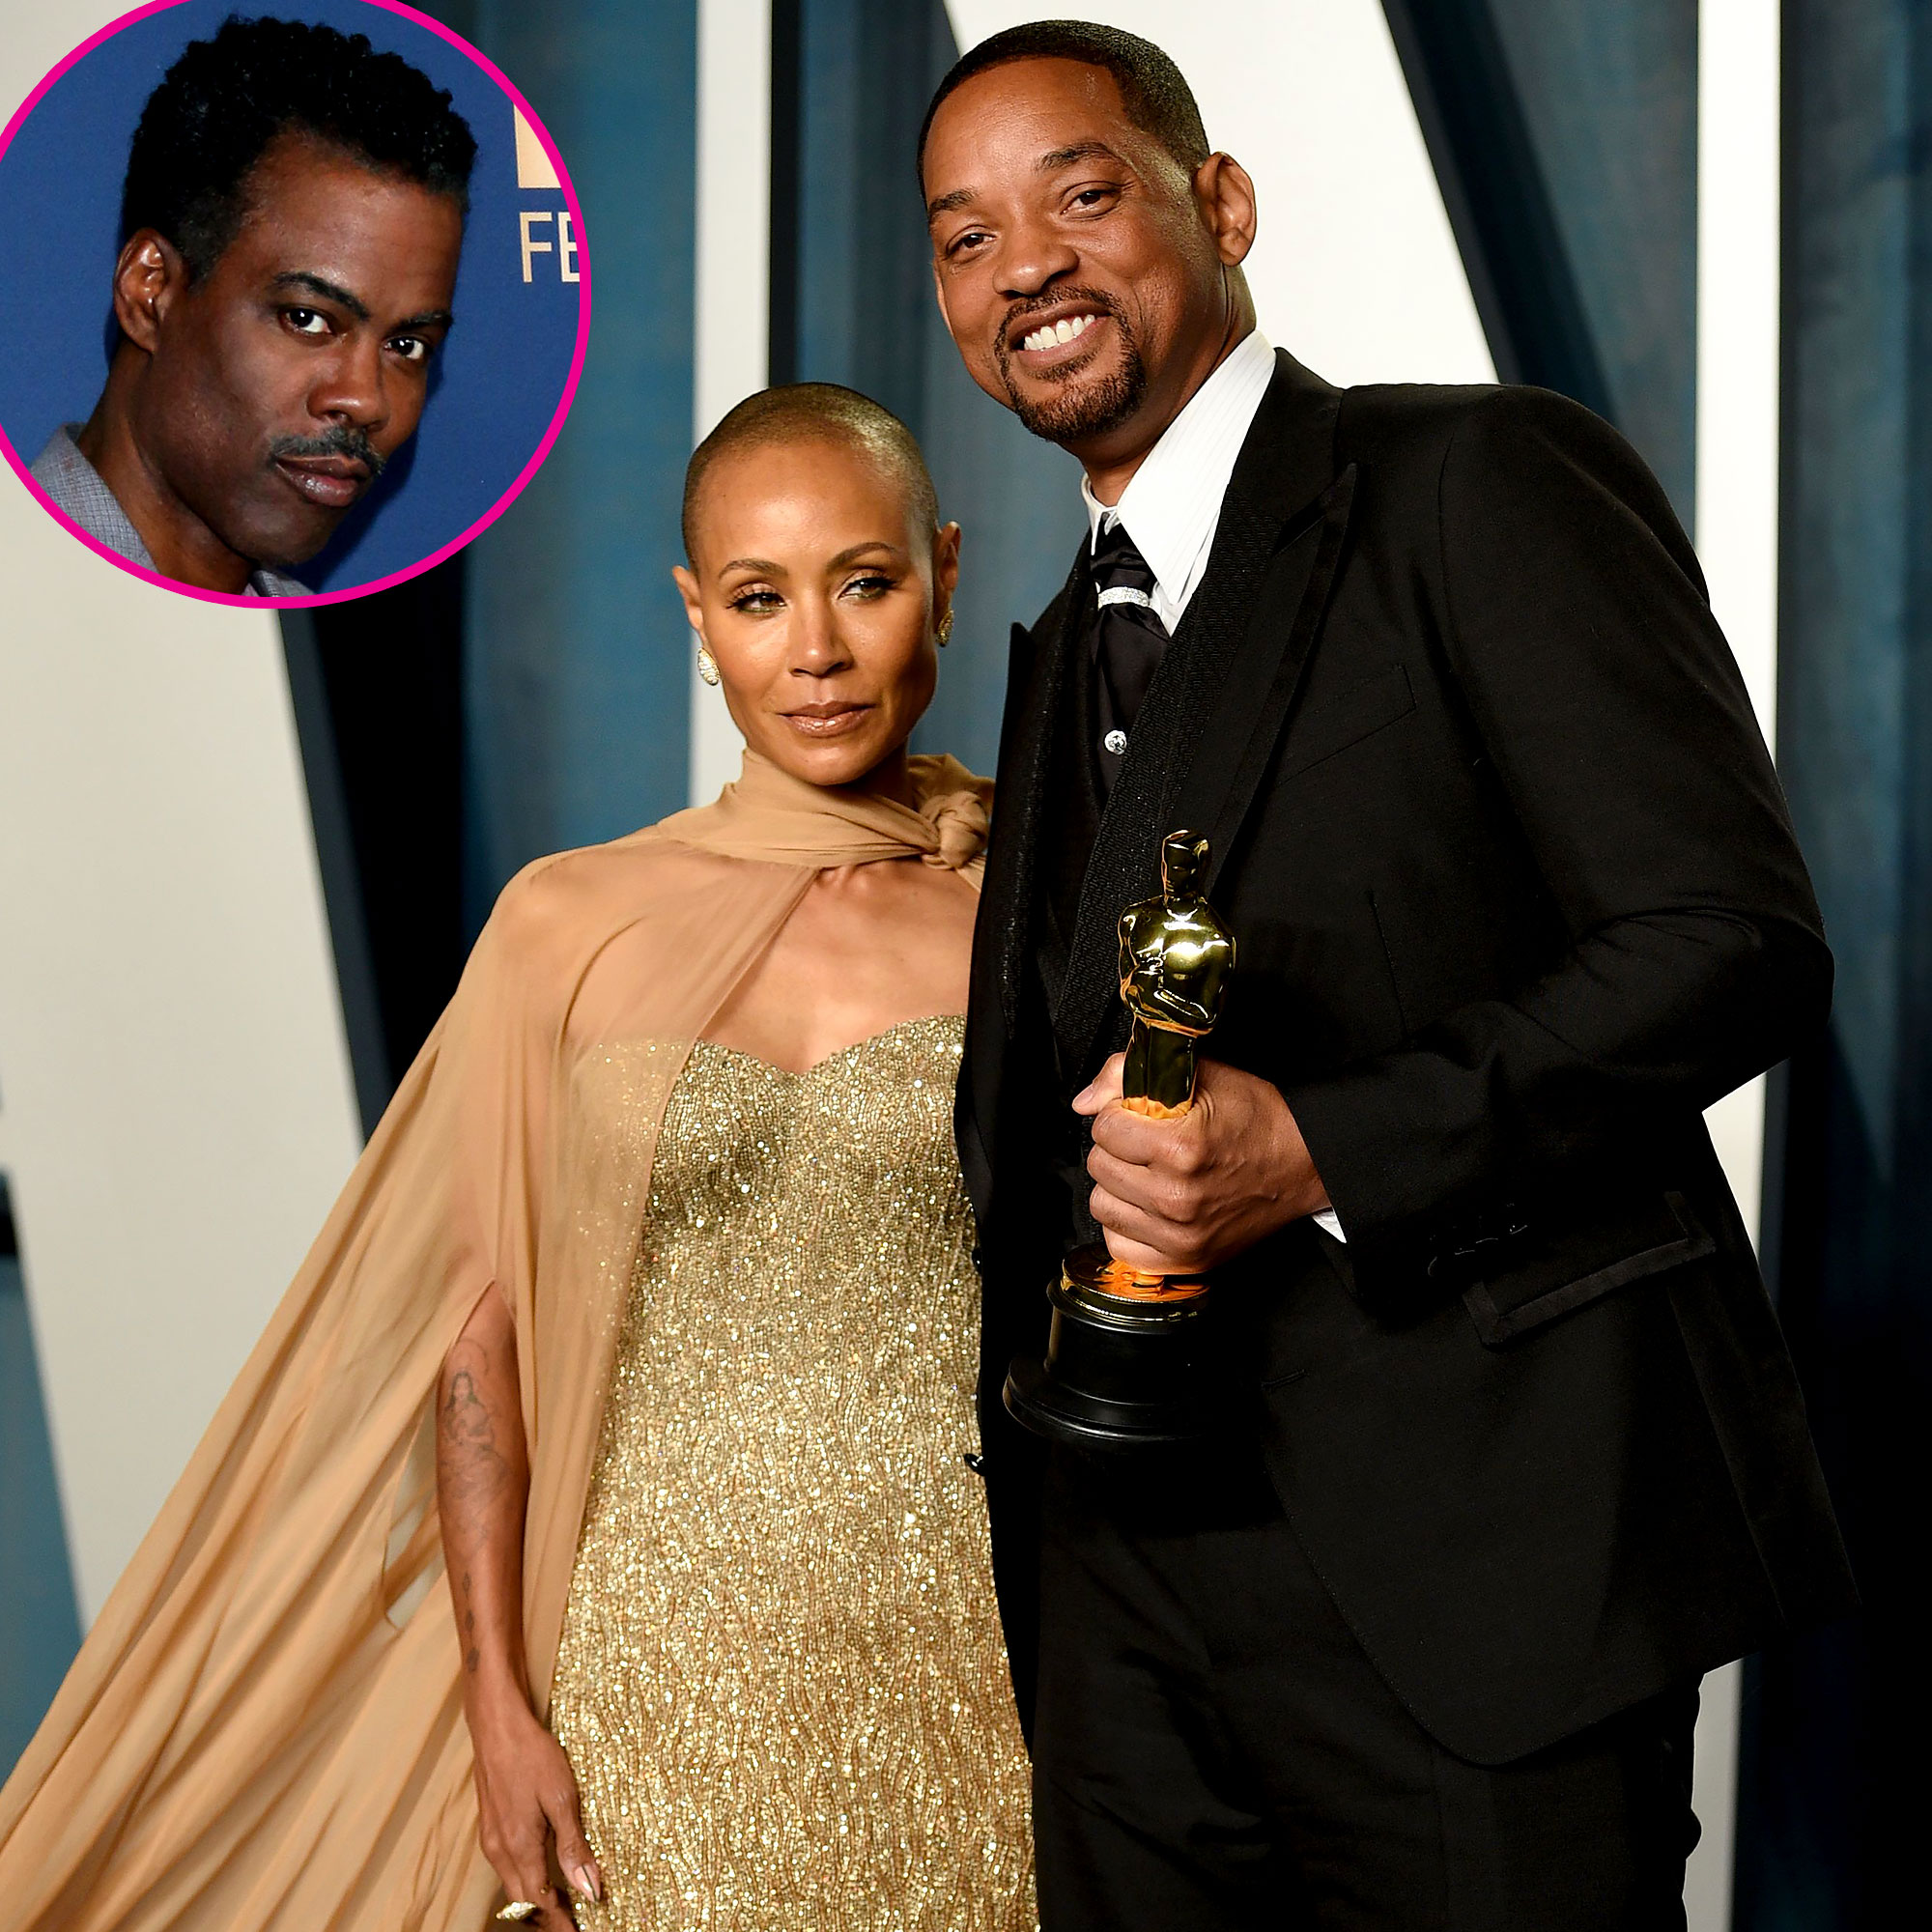 Jada Pinkett Smith Hints at 'Red Table About Oscars Slap